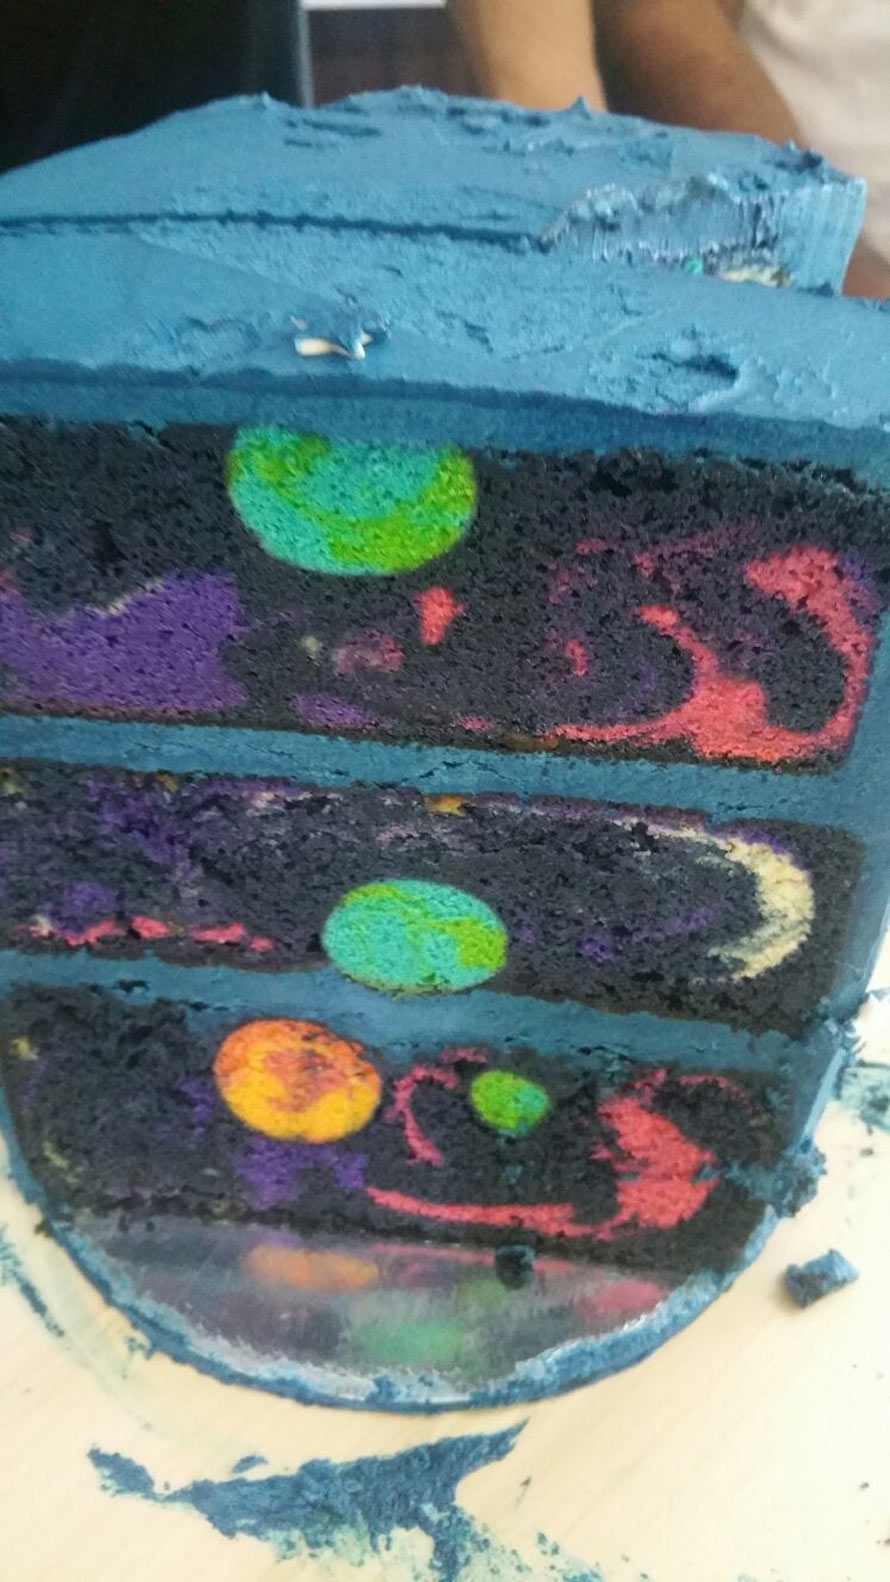 space-cake-2